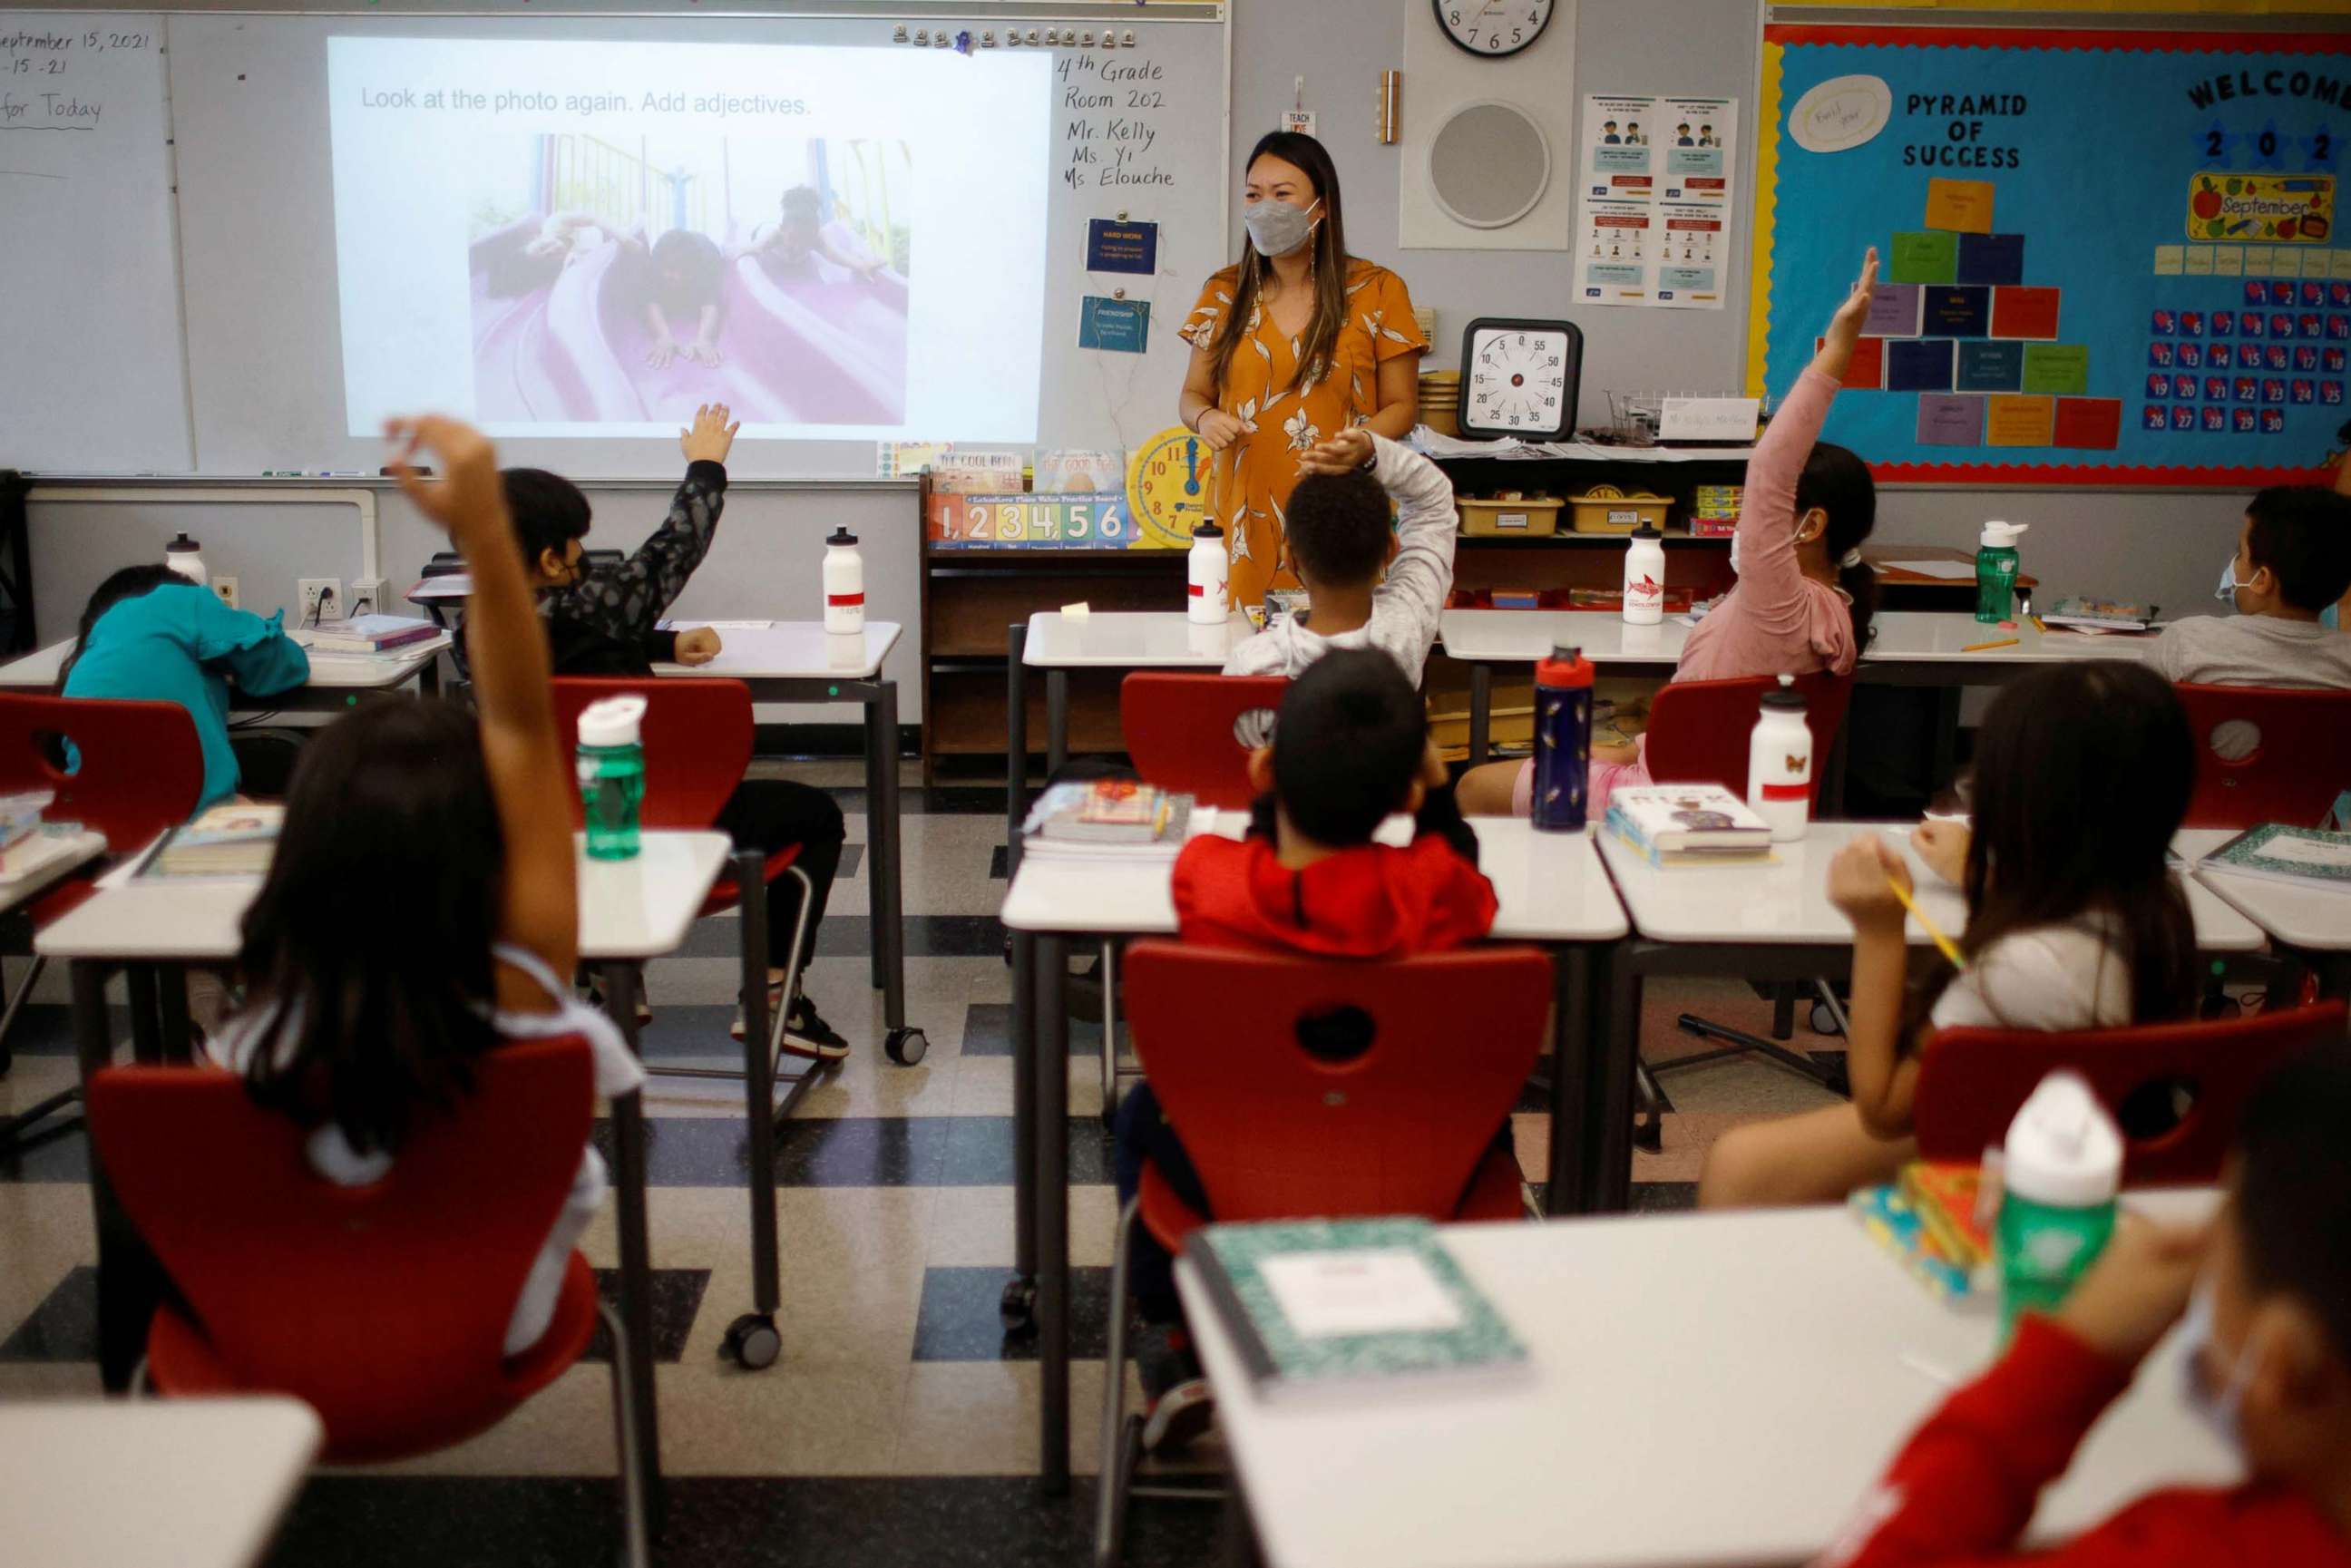 PHOTO: Teacher Mary Yi works with fourth grade students at the Sokolowski School, where students and teachers are required to wear masks because of the COVID-19 pandemic, in Chelsea, Mass., Sept. 15, 2021.